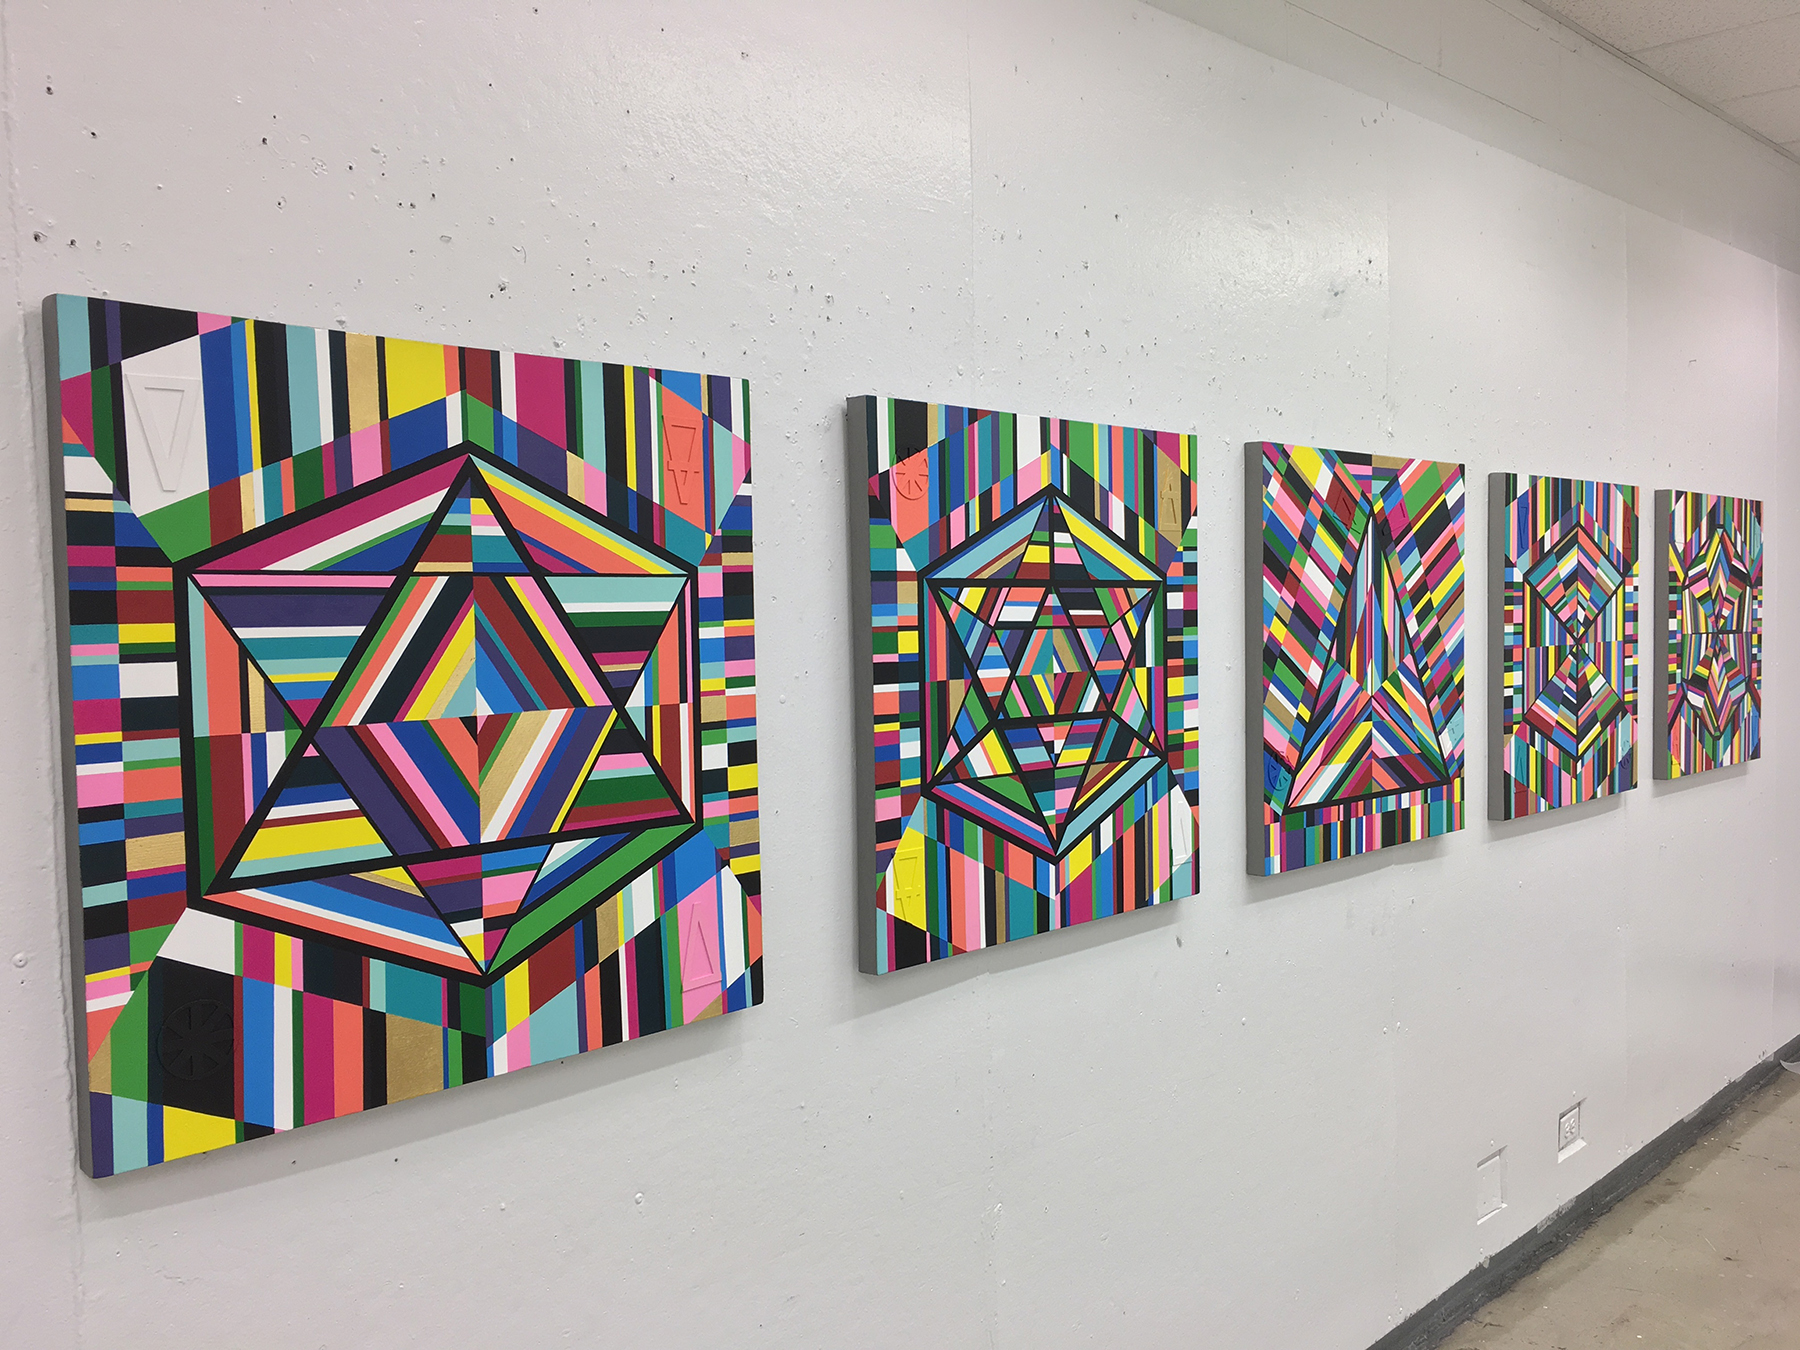 Image: “5 Platonic Solids” painting series by Kristoffer McAfee. A view of five mixed media paintings, (acrylic paint, illustration board, and gold foil) on canvas, 30”x30” each. Image courtesy of the artist.